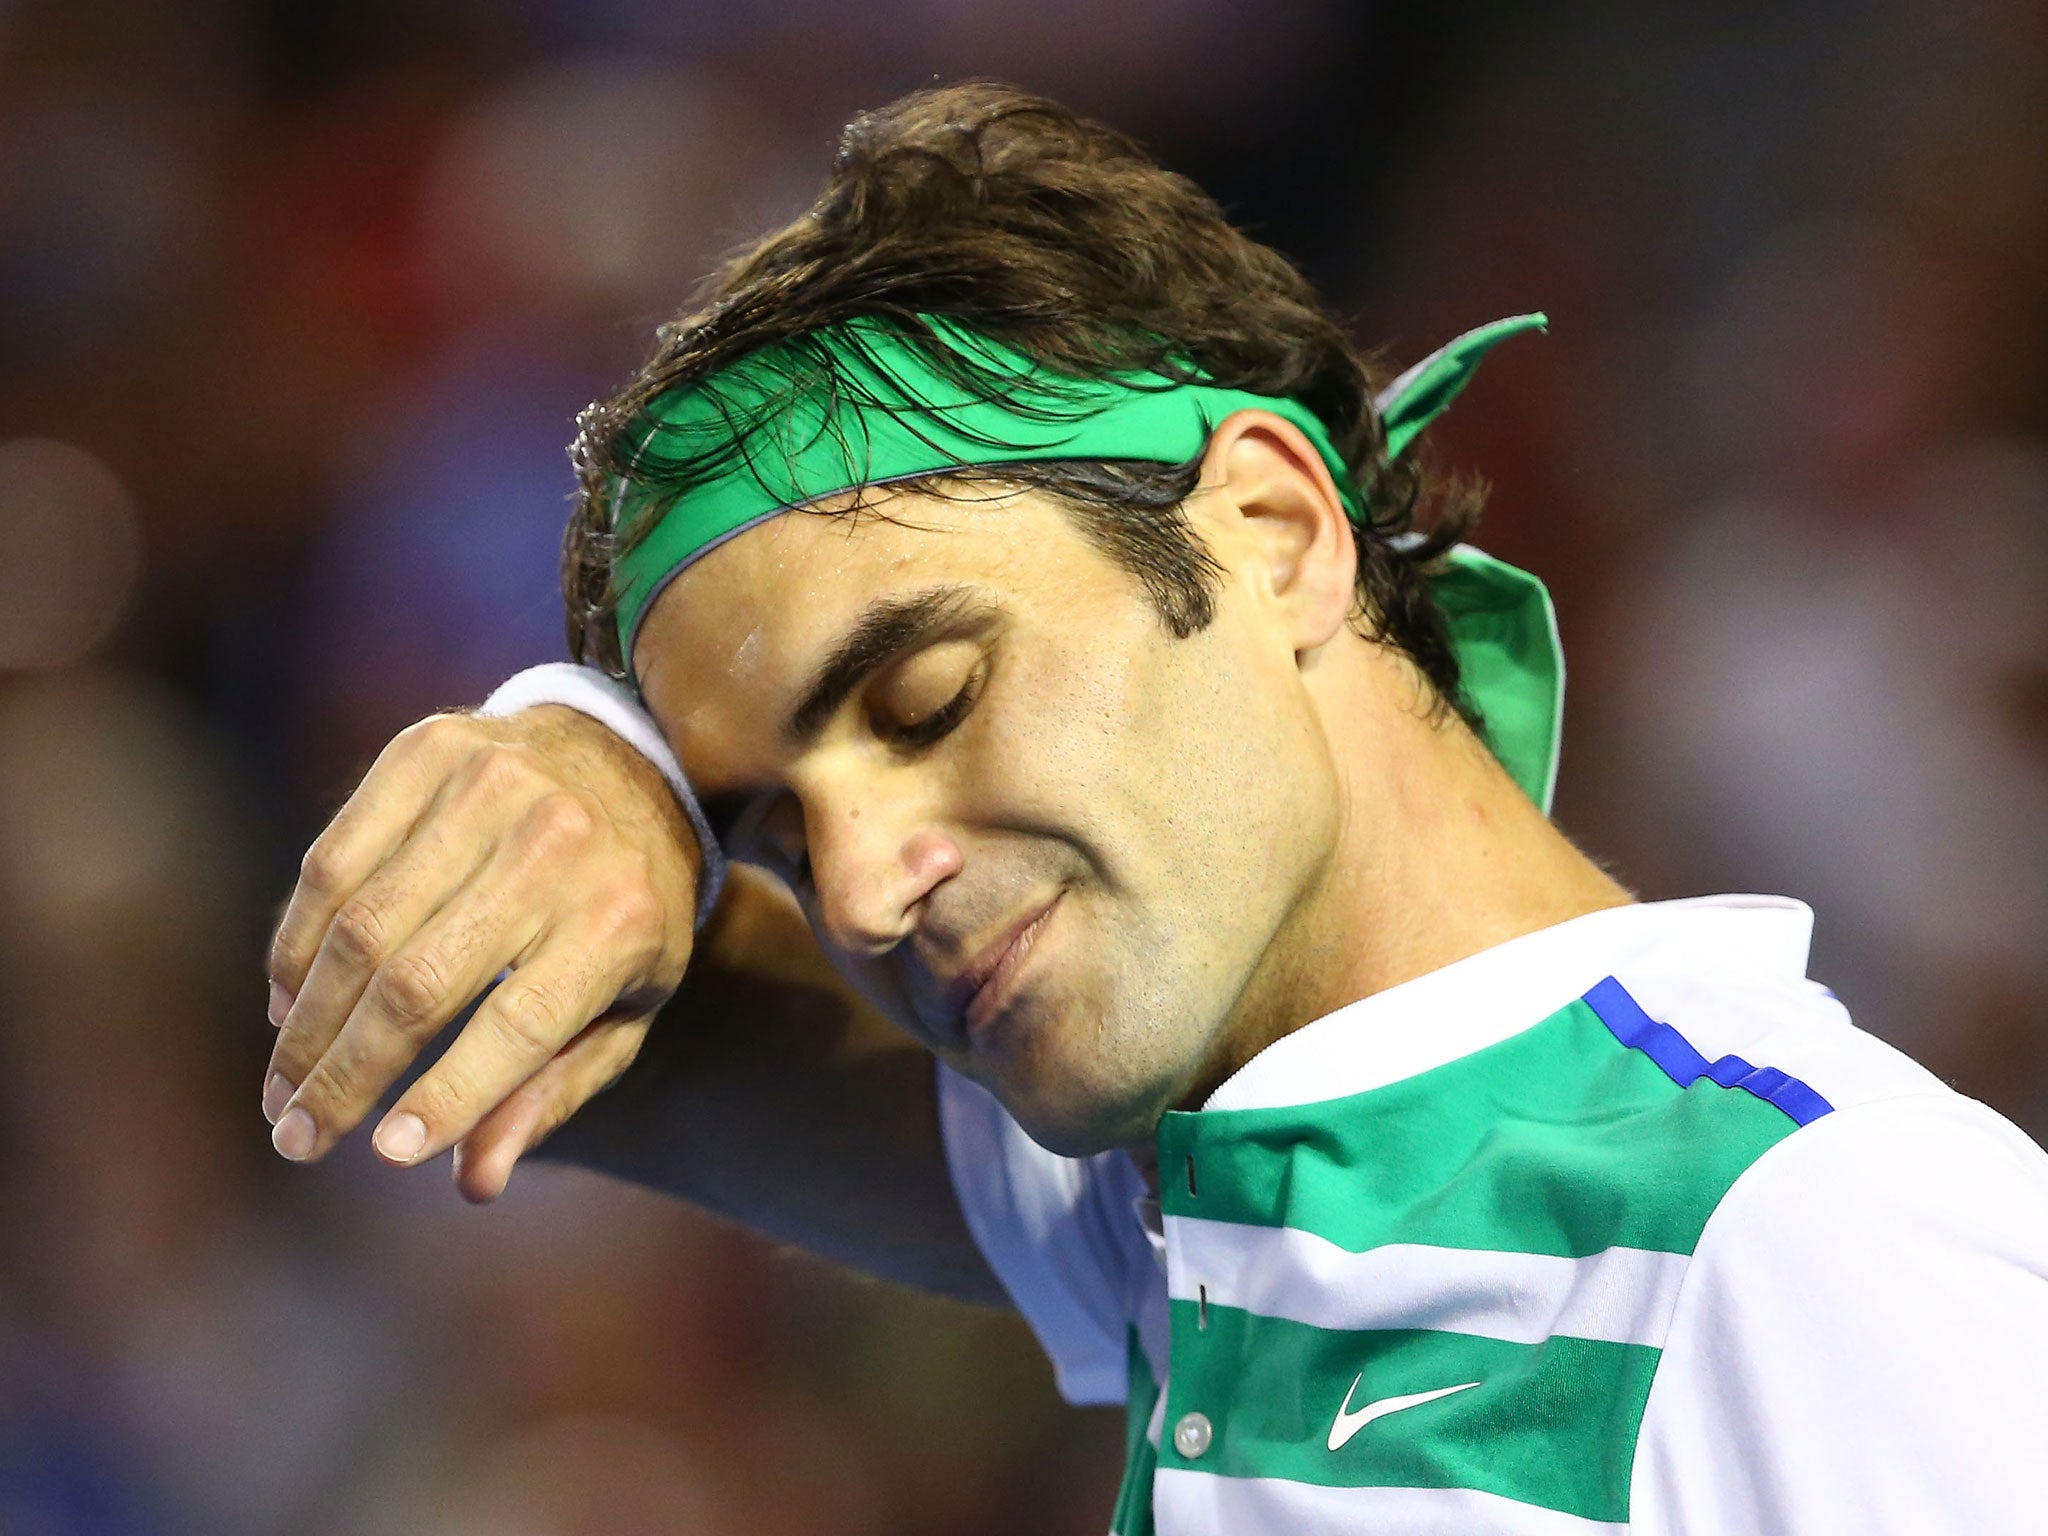 Roger Federer will miss at least a month after having knee surgery following the Australian Open